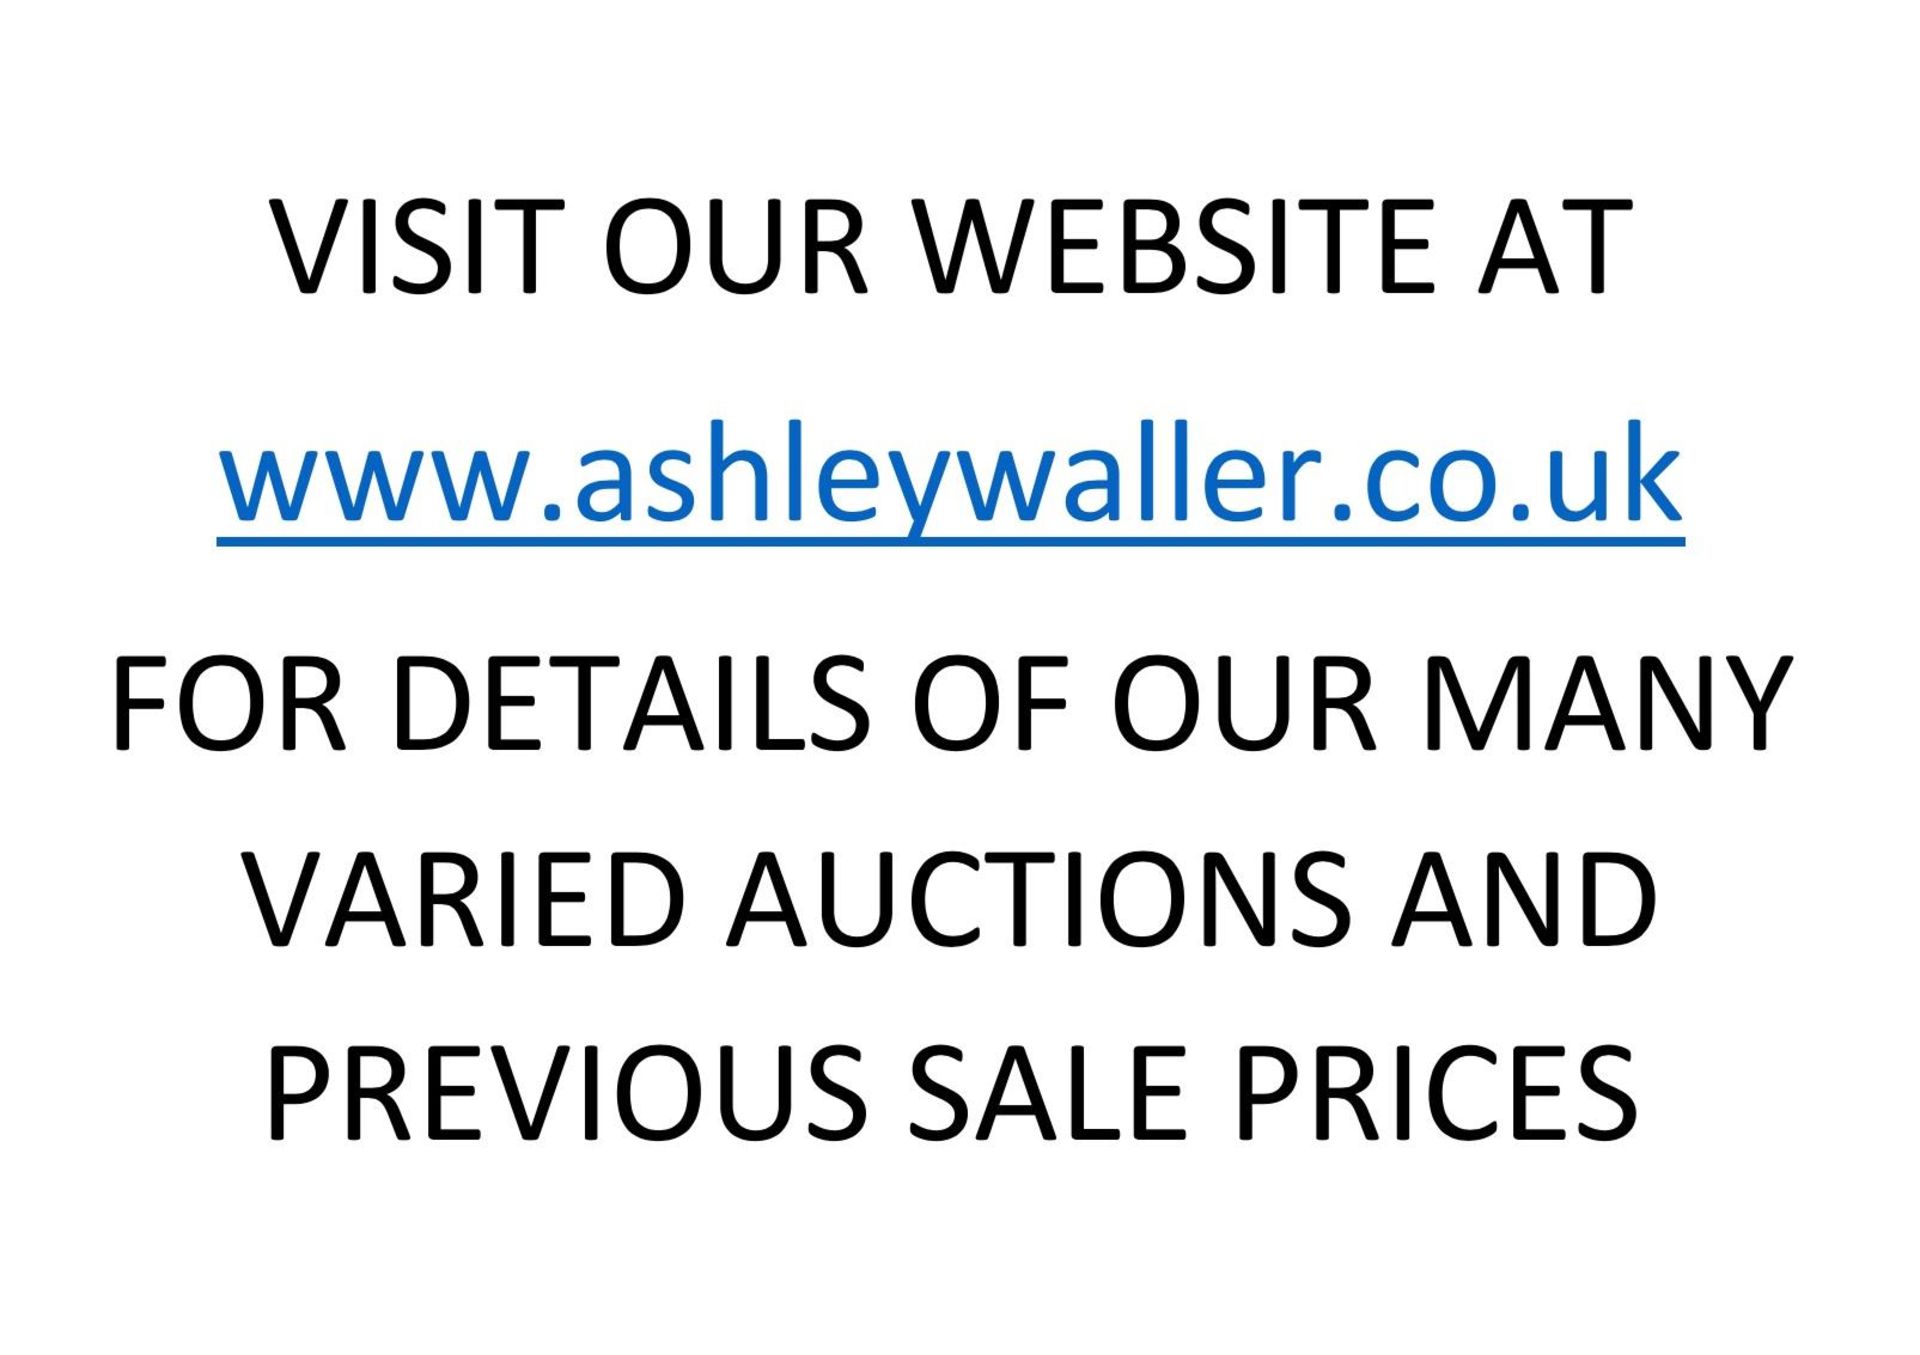 END OF SALE, THANK YOU FOR YOUR BIDDING. OUR NEXT SALE IS ON THE 10TH & 11TH MAY 2023